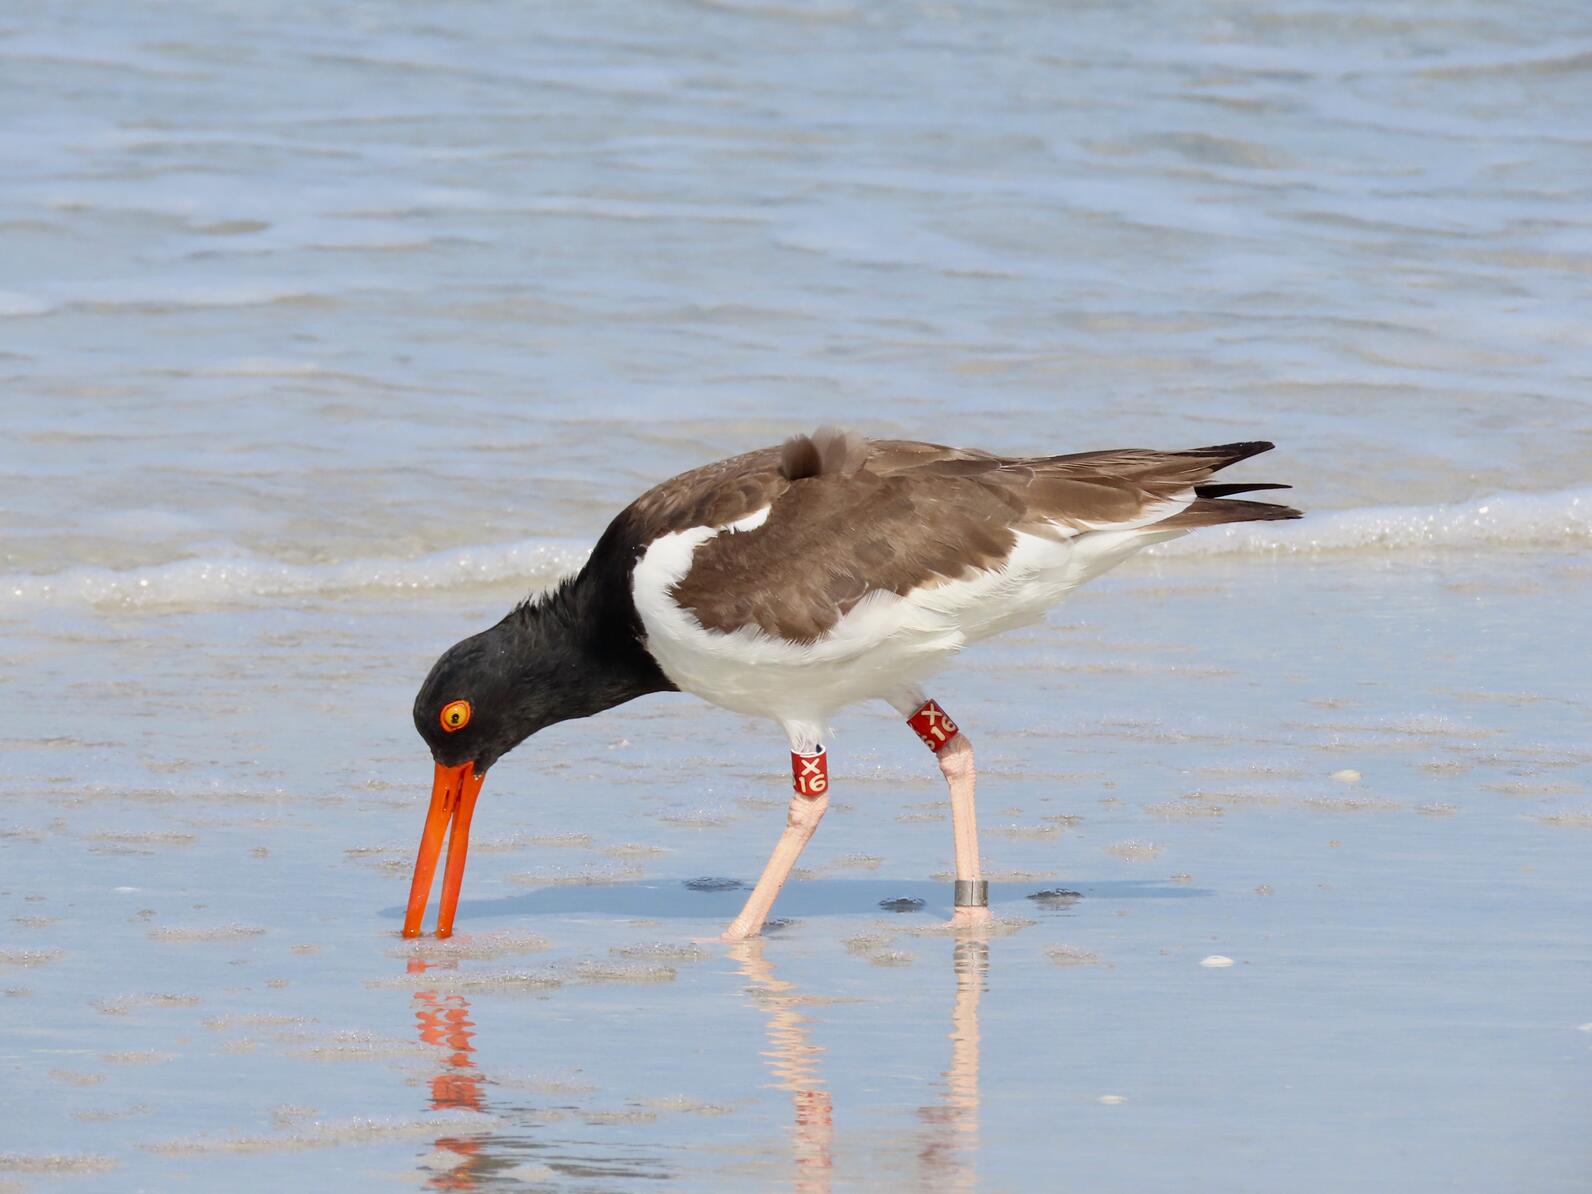 A banded American Oystercatcher standing in shallow water.